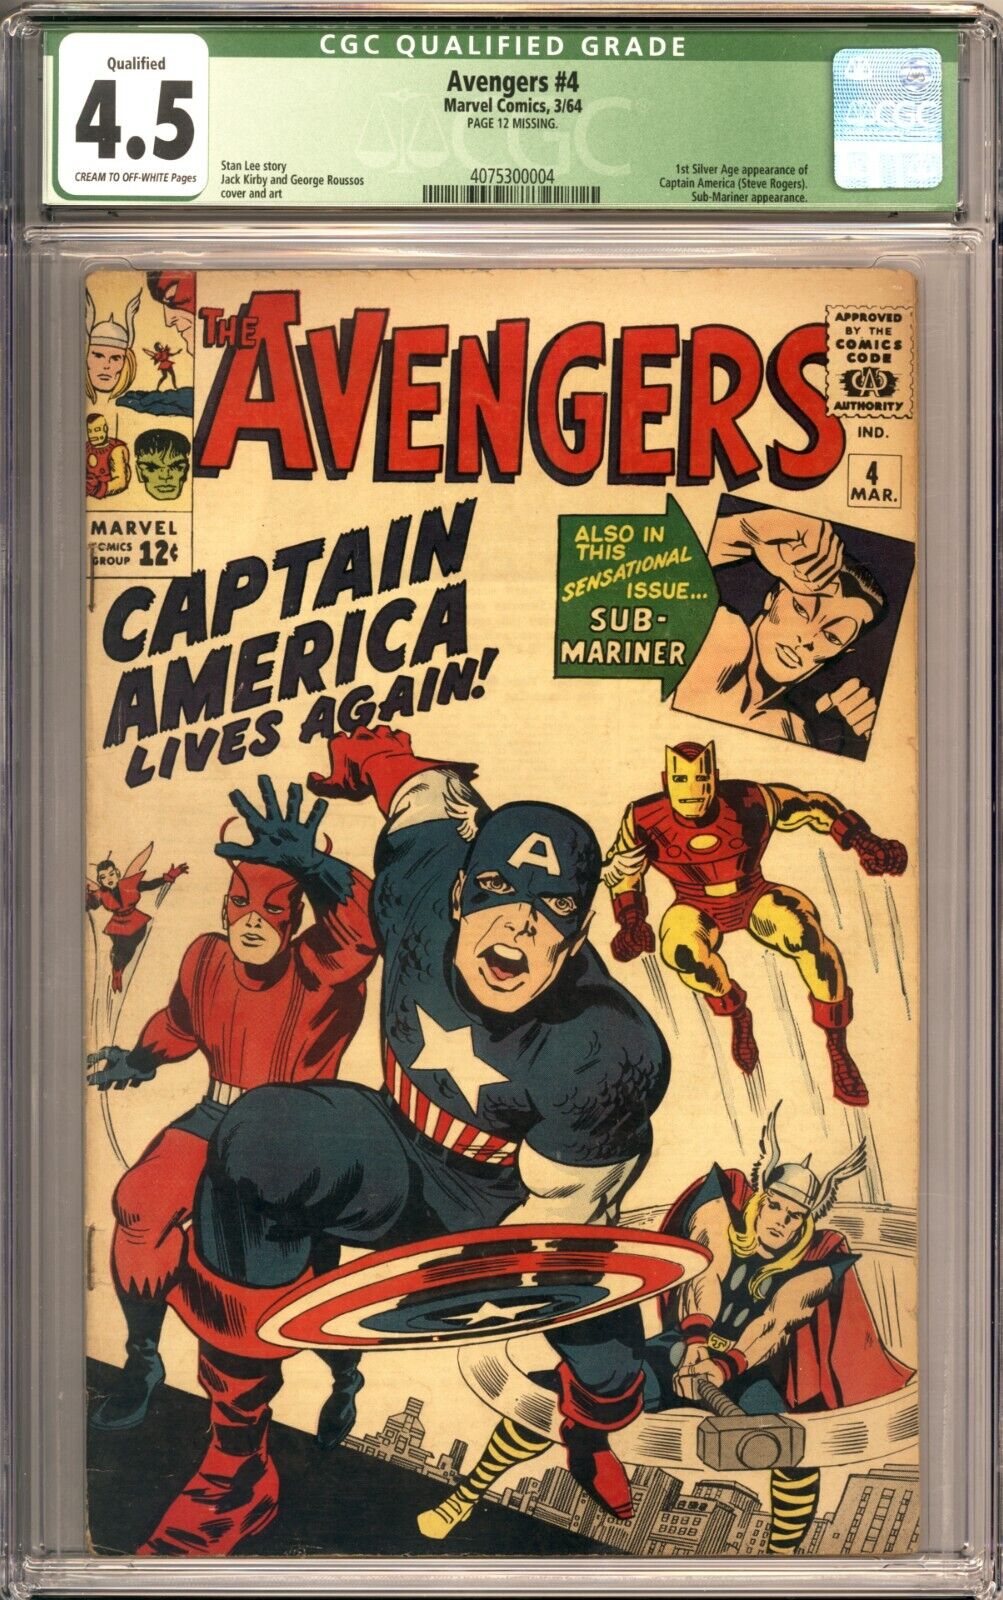 Avengers 4 CGC 45 Qualified Great Book 1st Silver Age App Captain America 1964